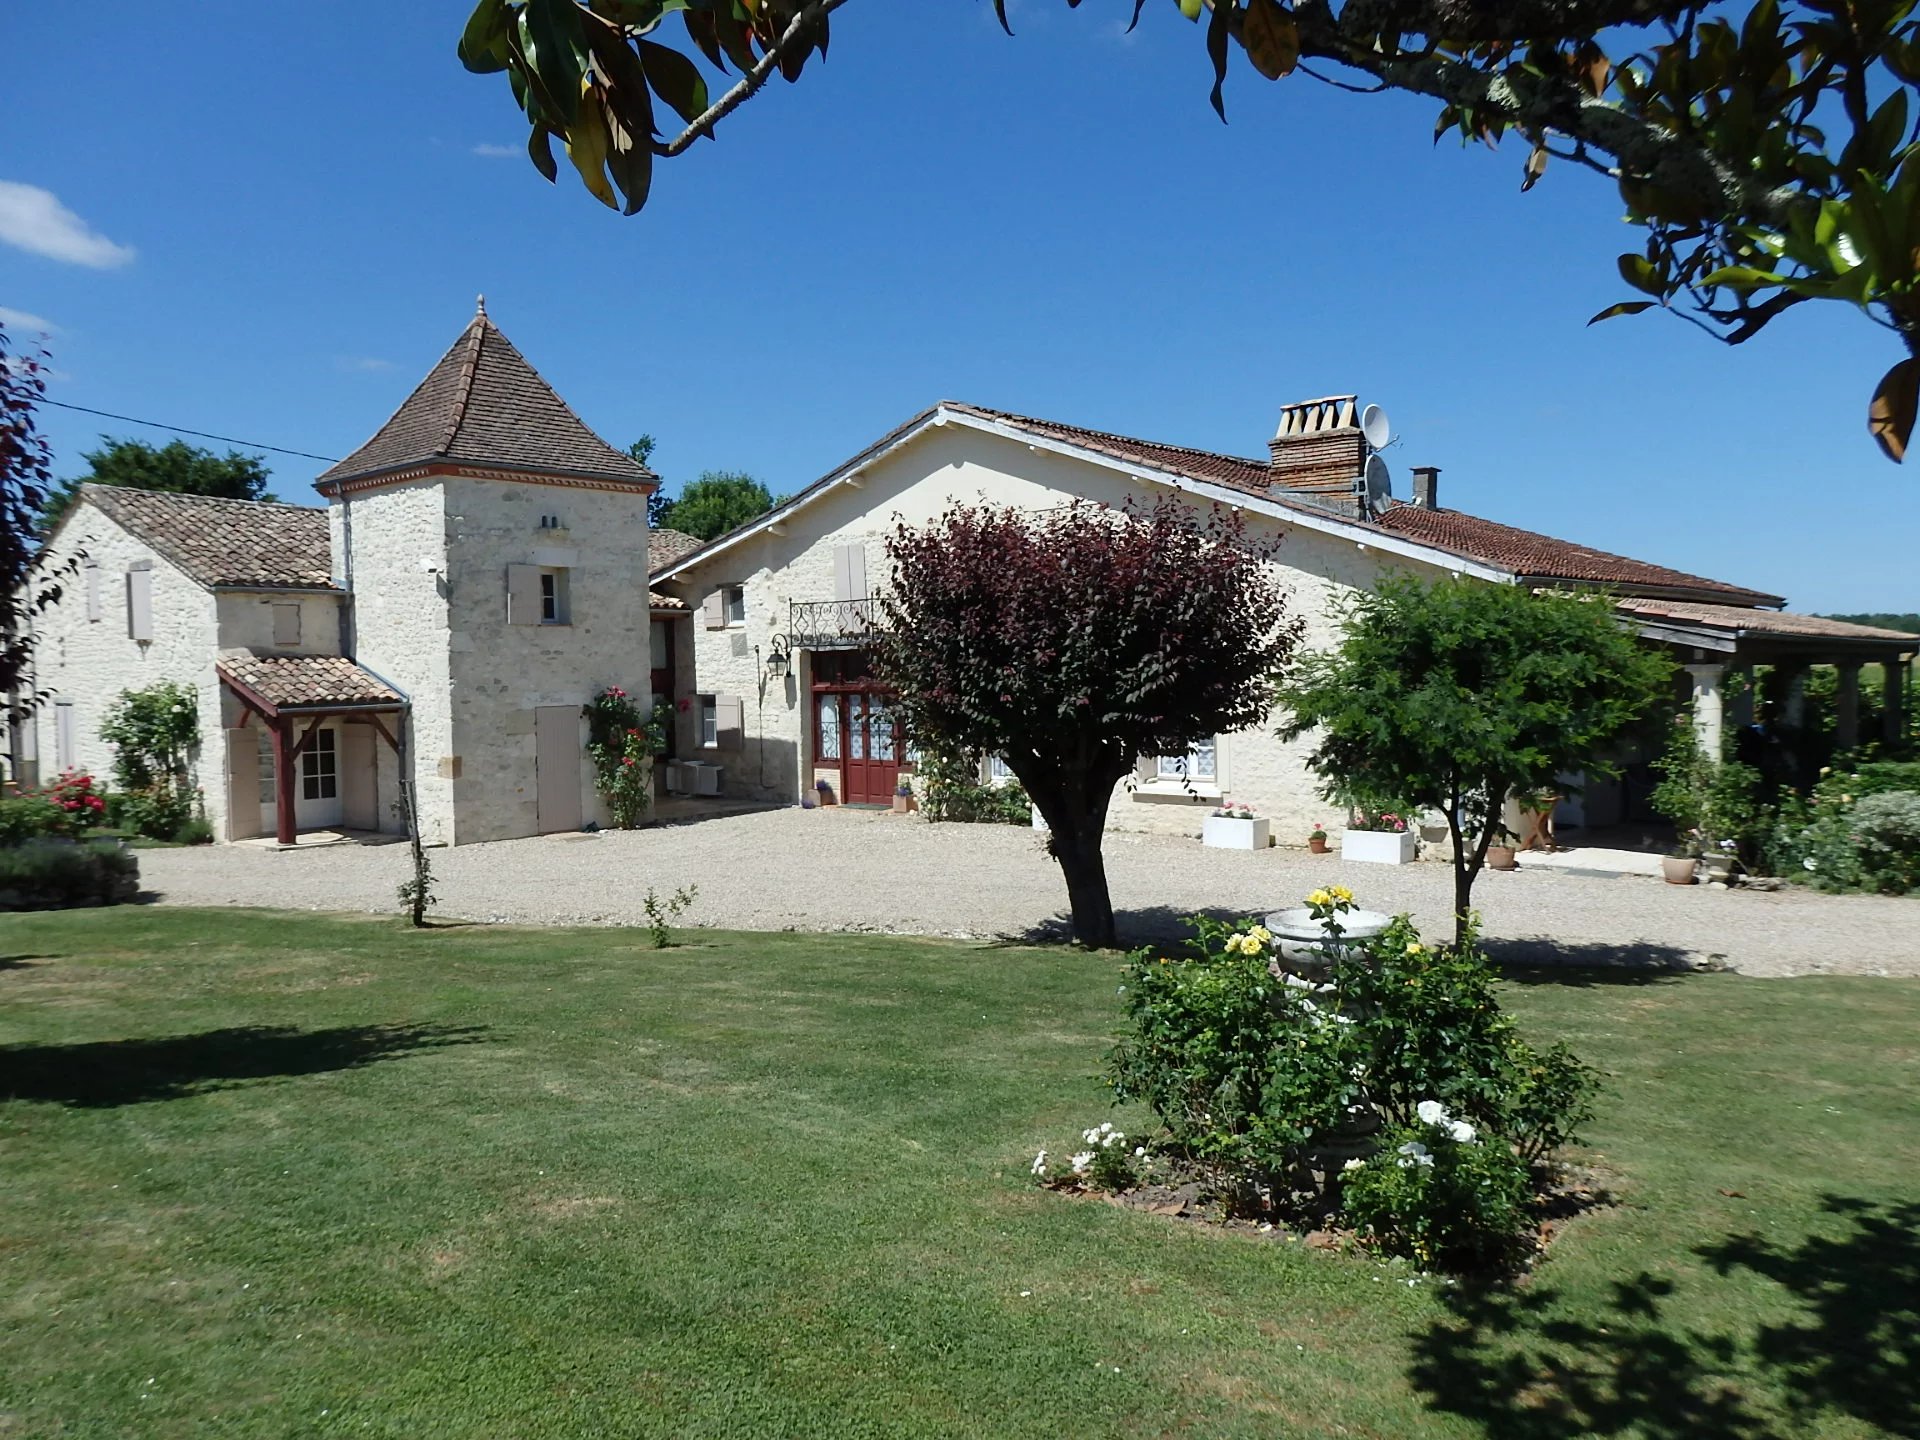 Stone property with income potential, in vineyard setting 10 minutes from Duras